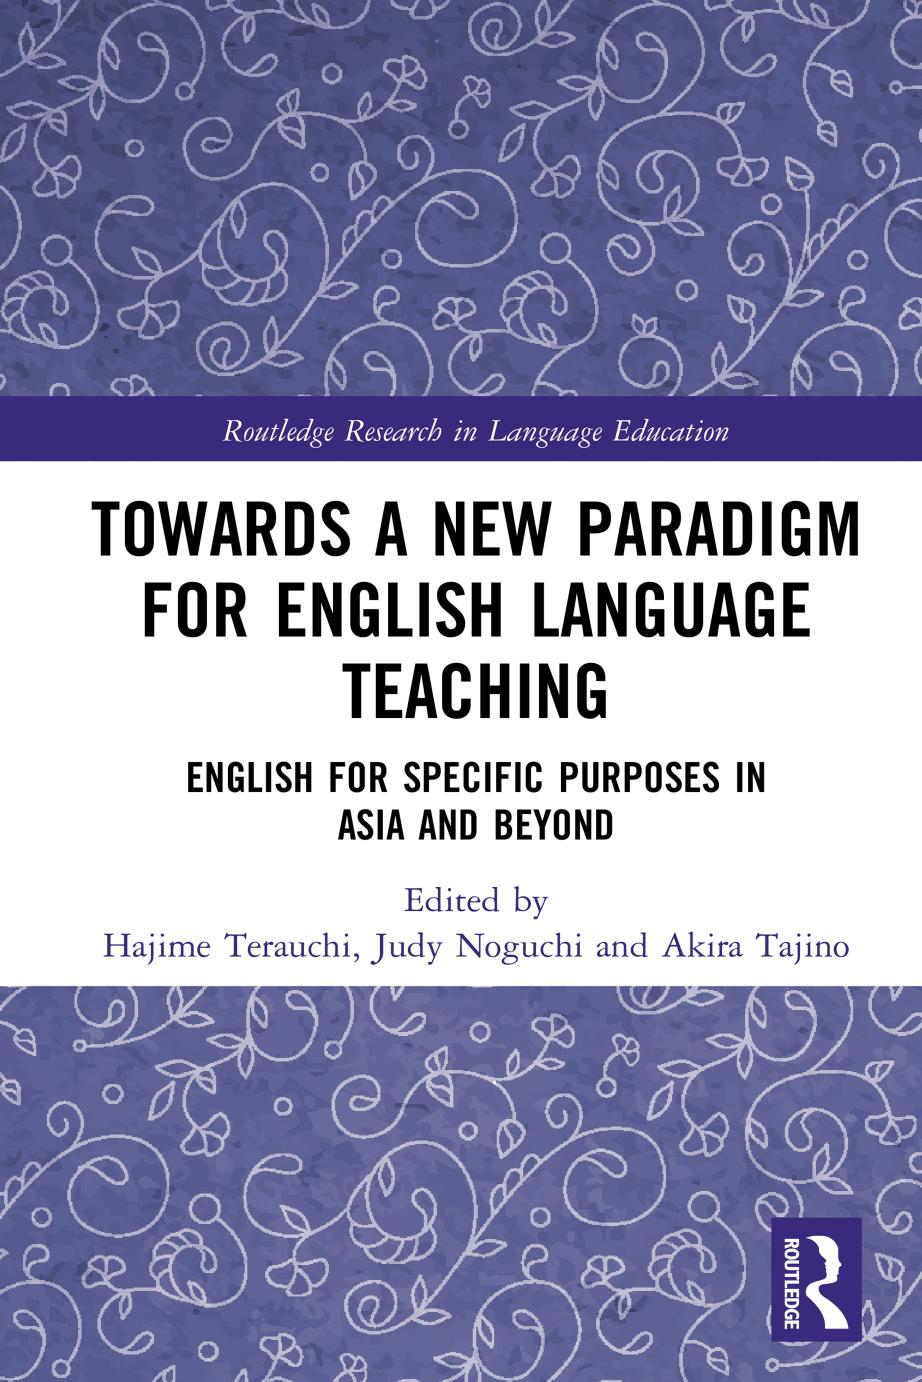 Towards a New Paradigm for English Language Teaching: English for Specific Purposes in Asia and Beyond